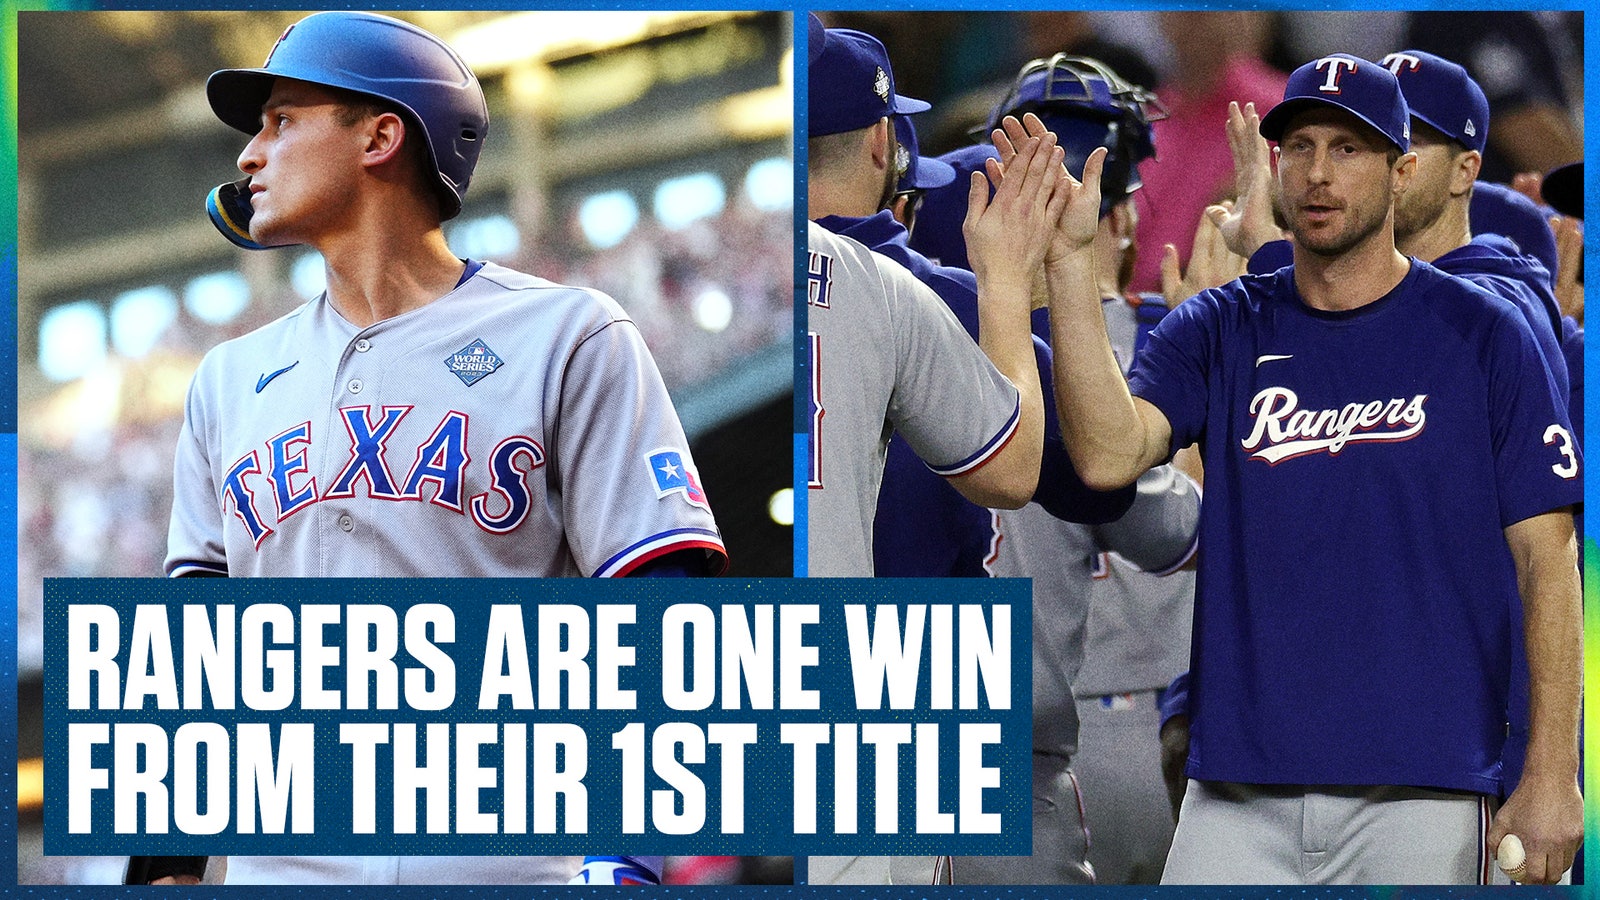 Rangers are one win away from first World Series title